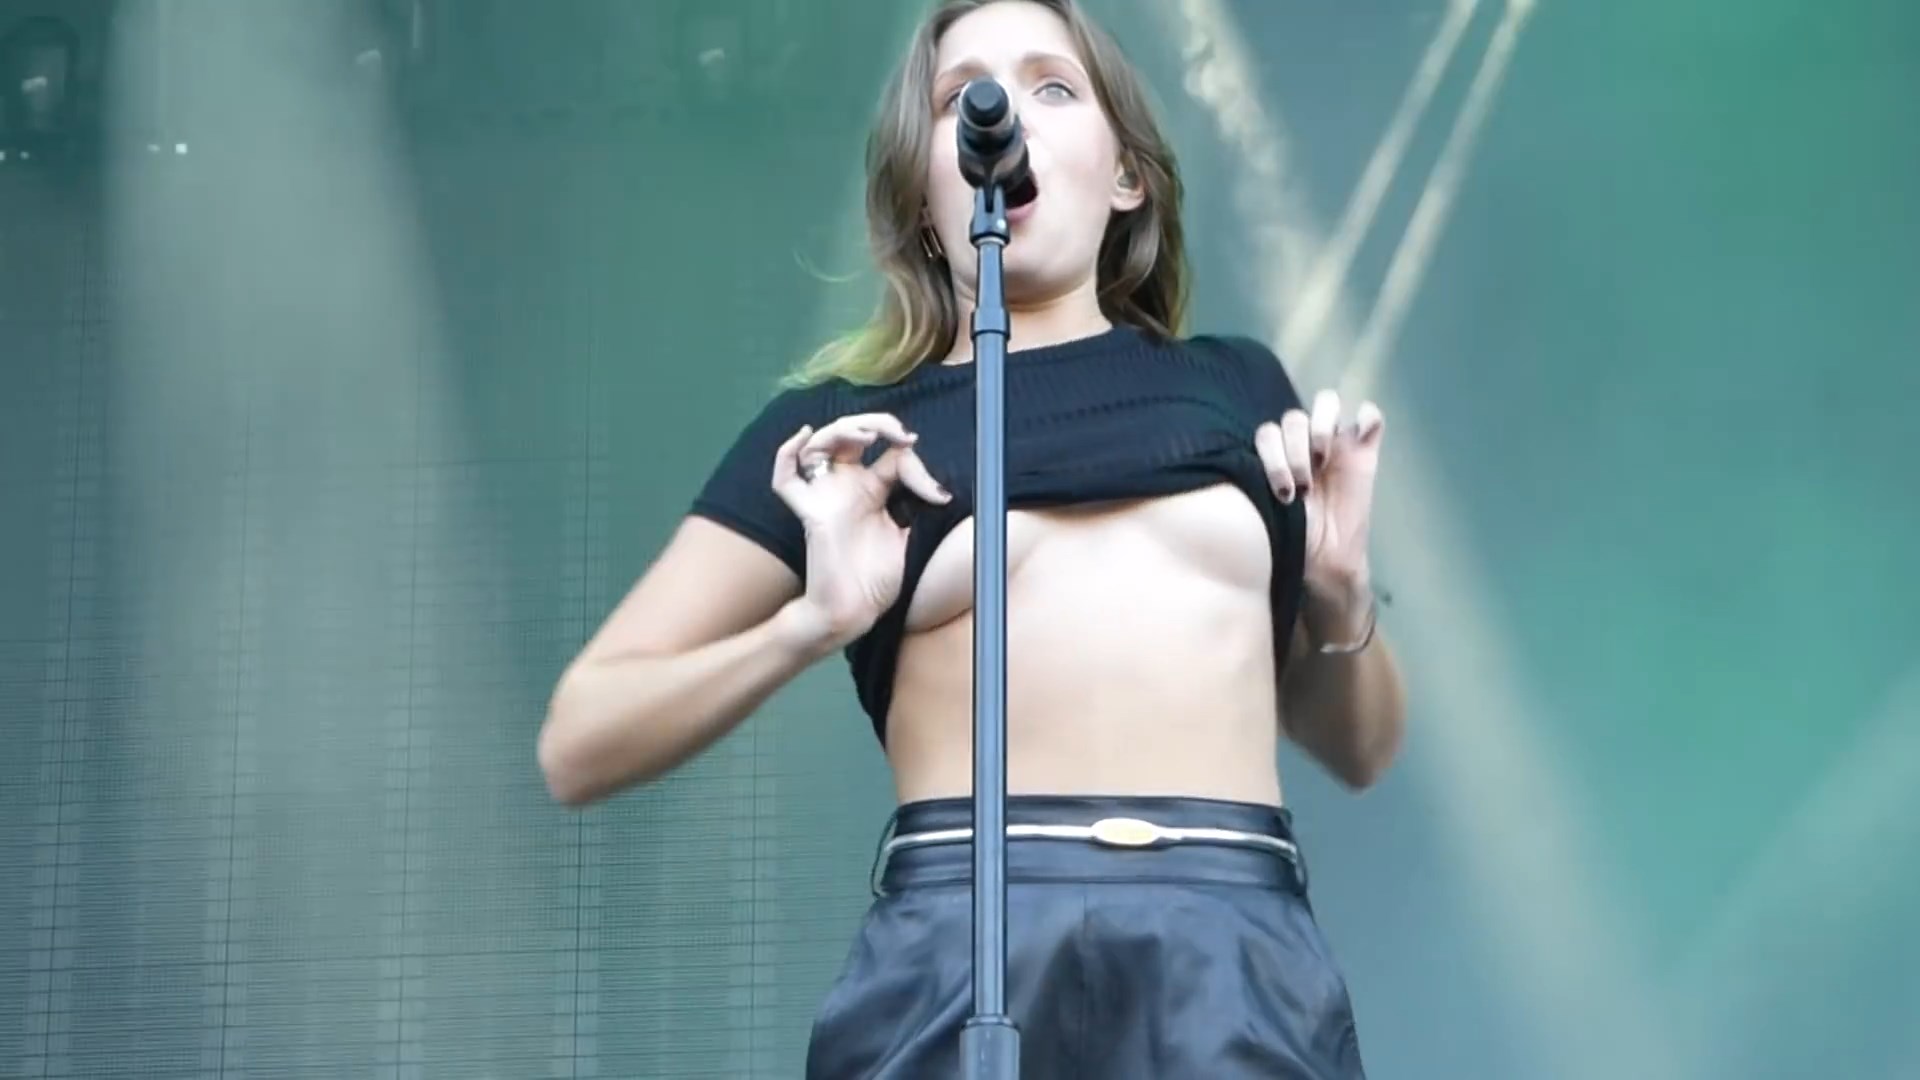 Tove getting changed concert amazing perky